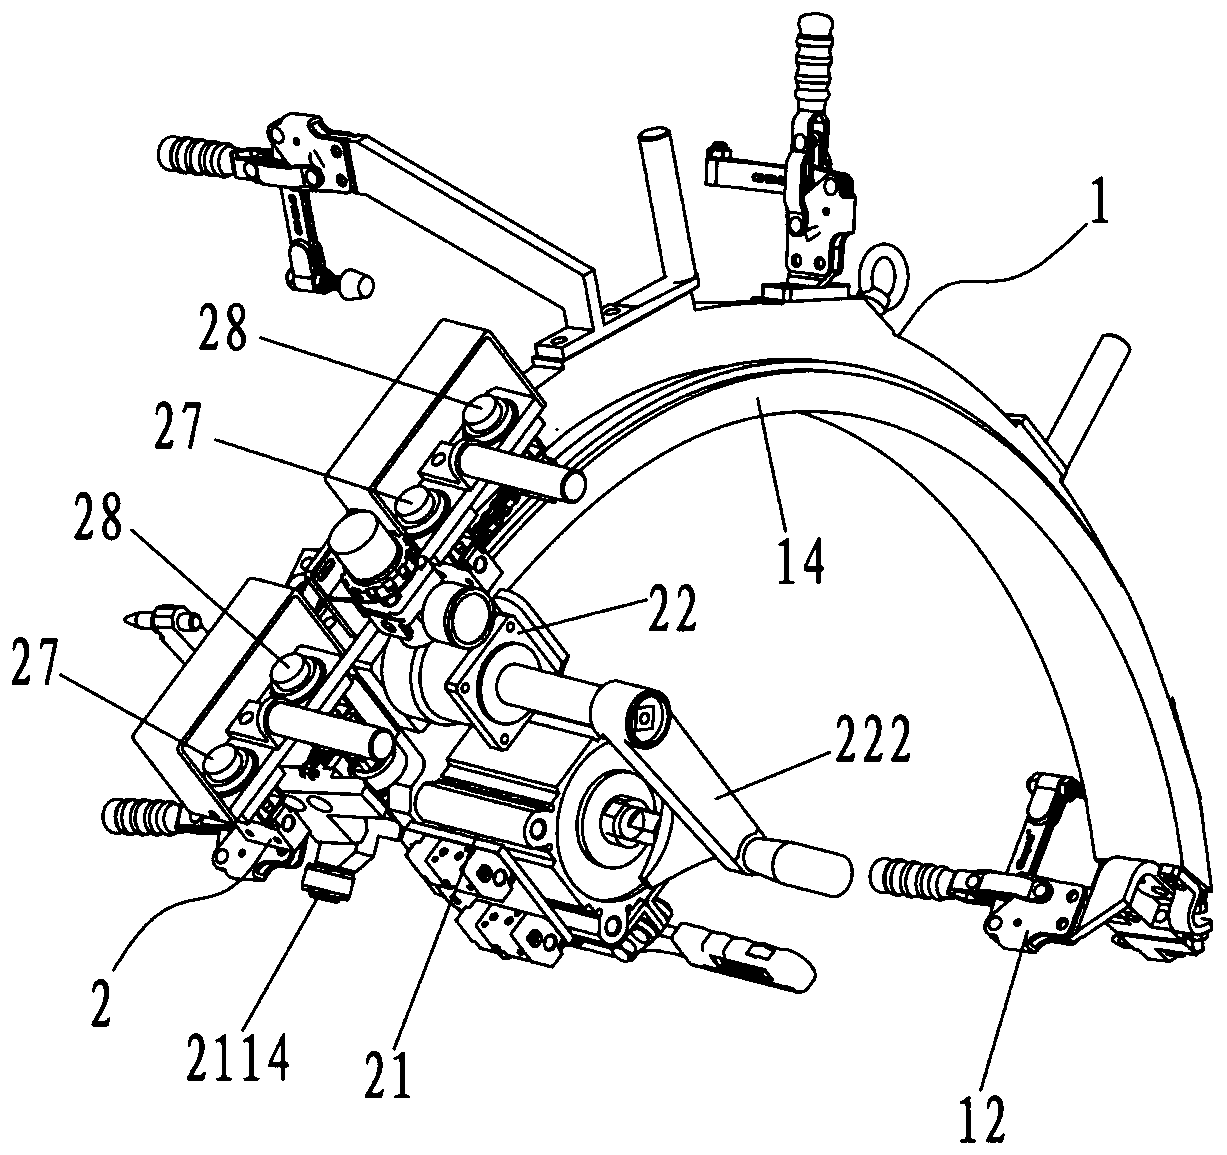 Automobile wheel cover hemming device